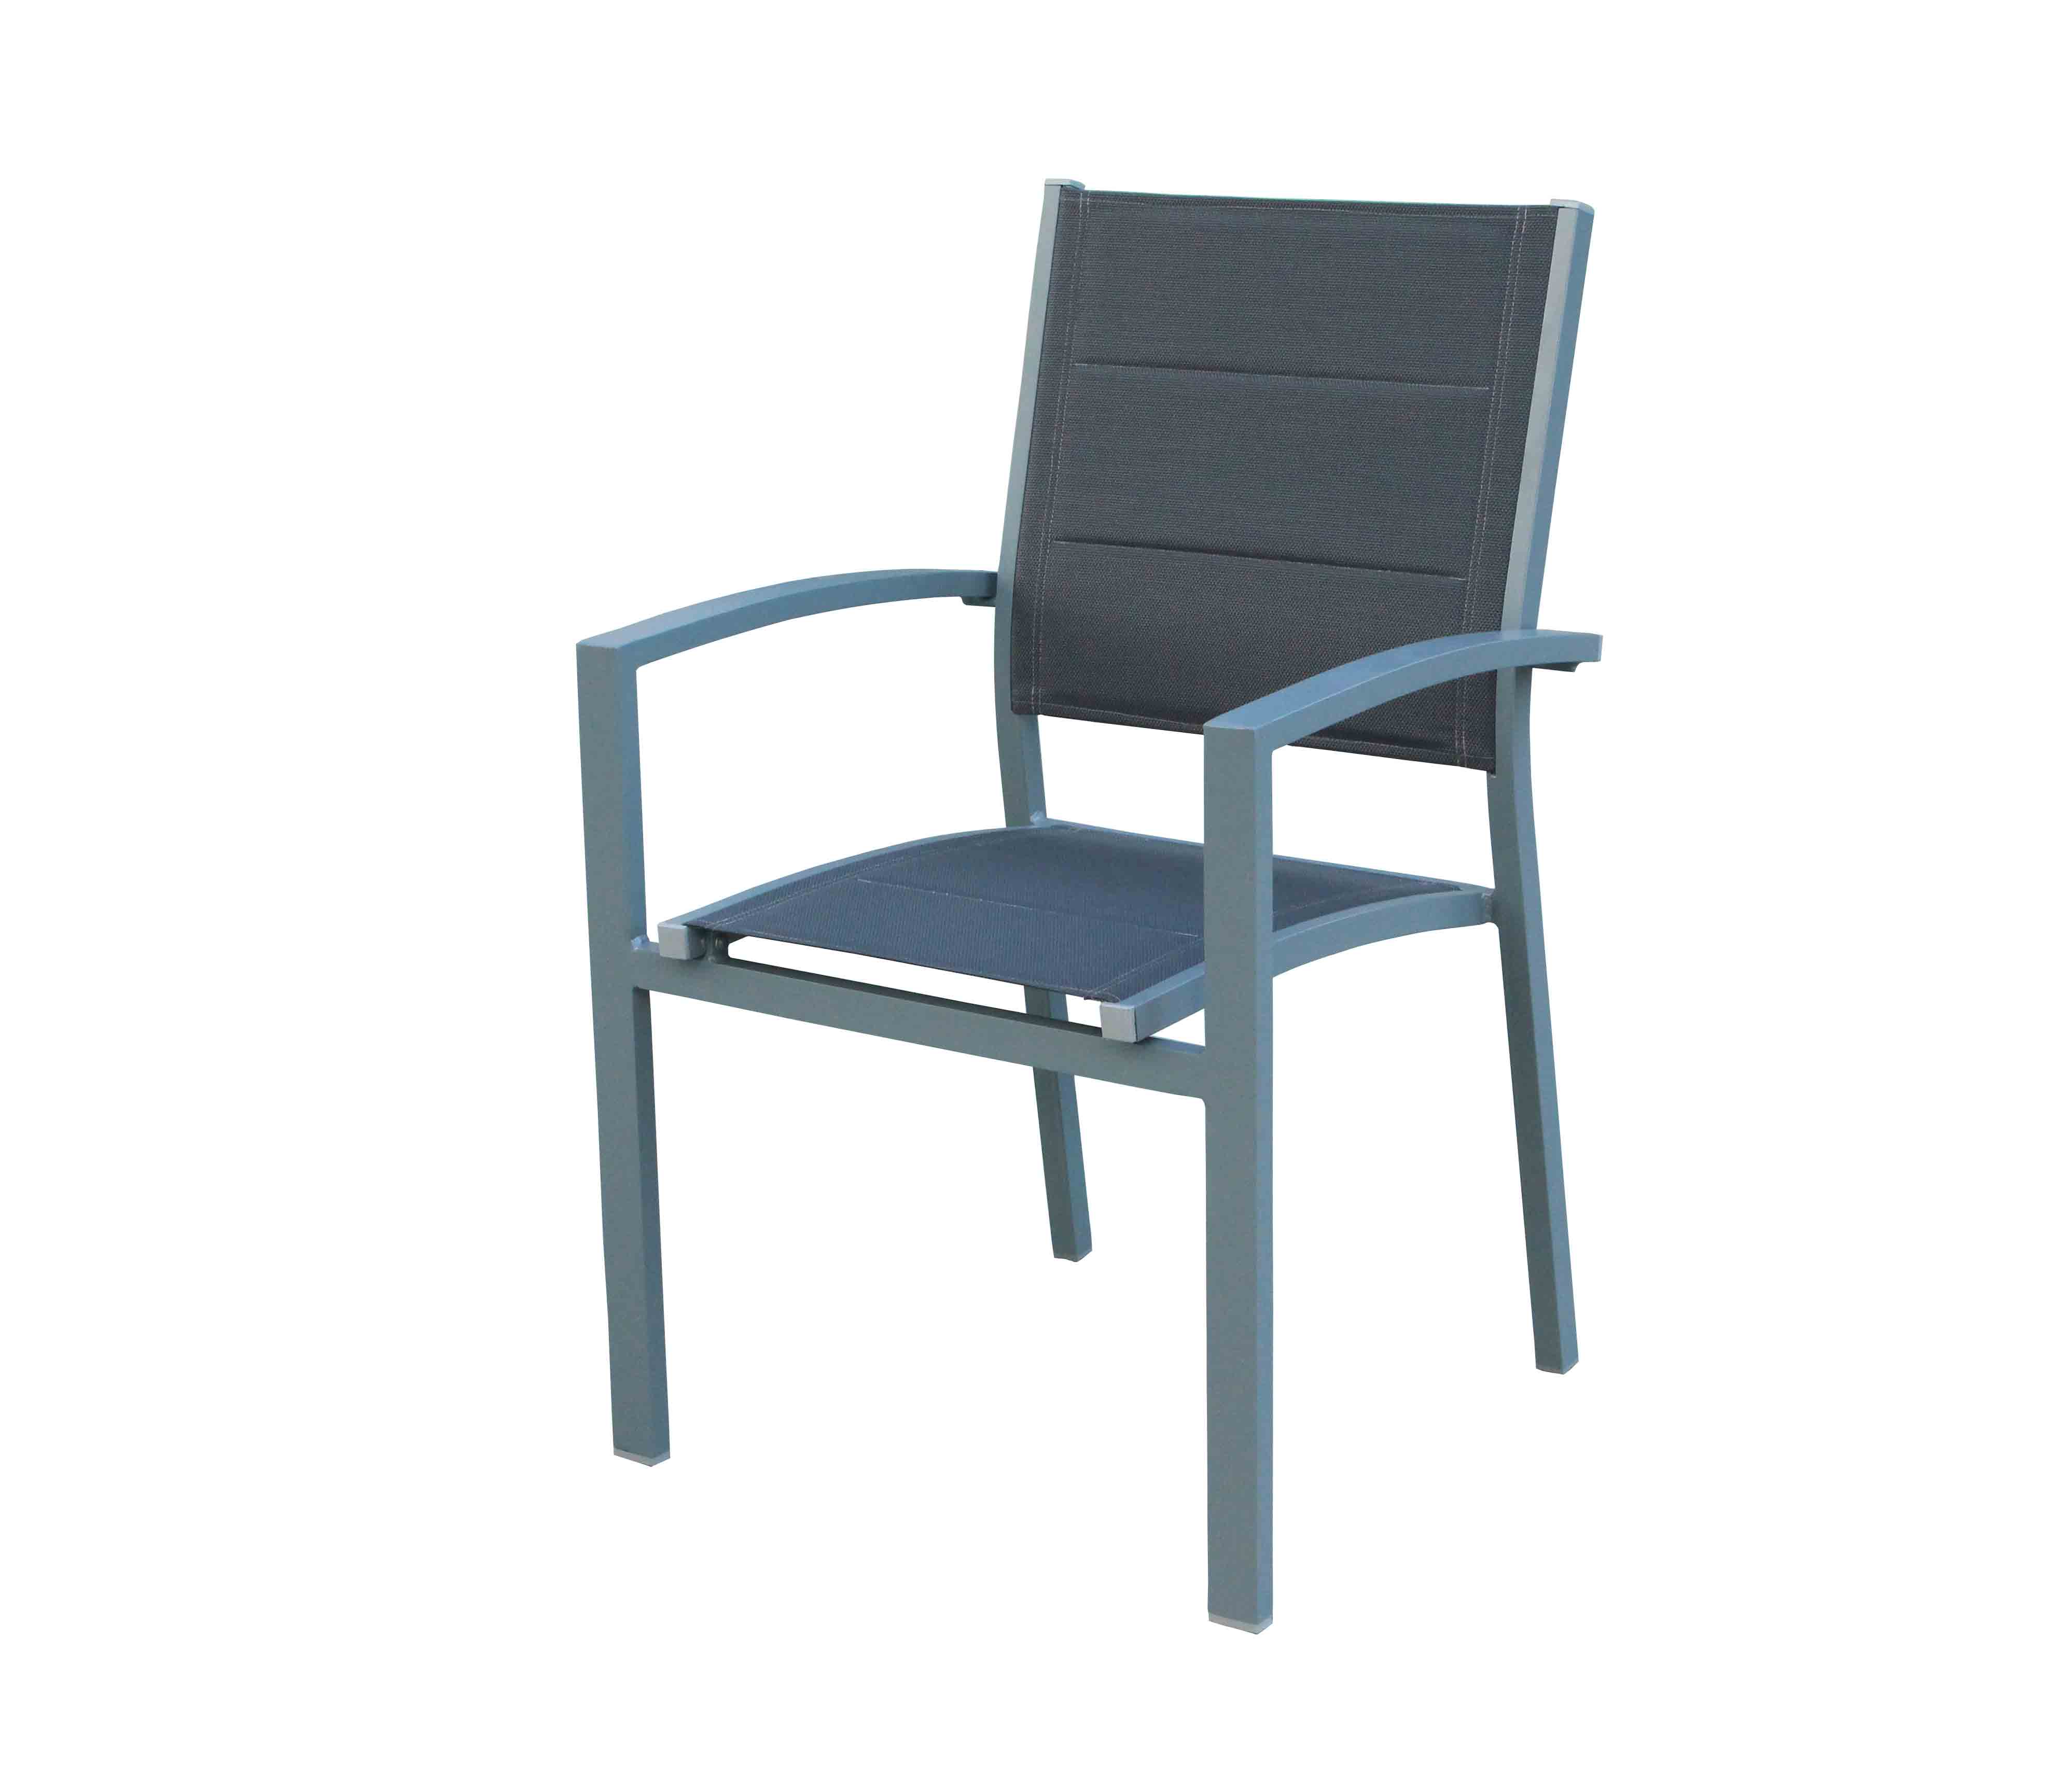 JJC417 Aluminum textilene stacking chair with armrest Featured Image